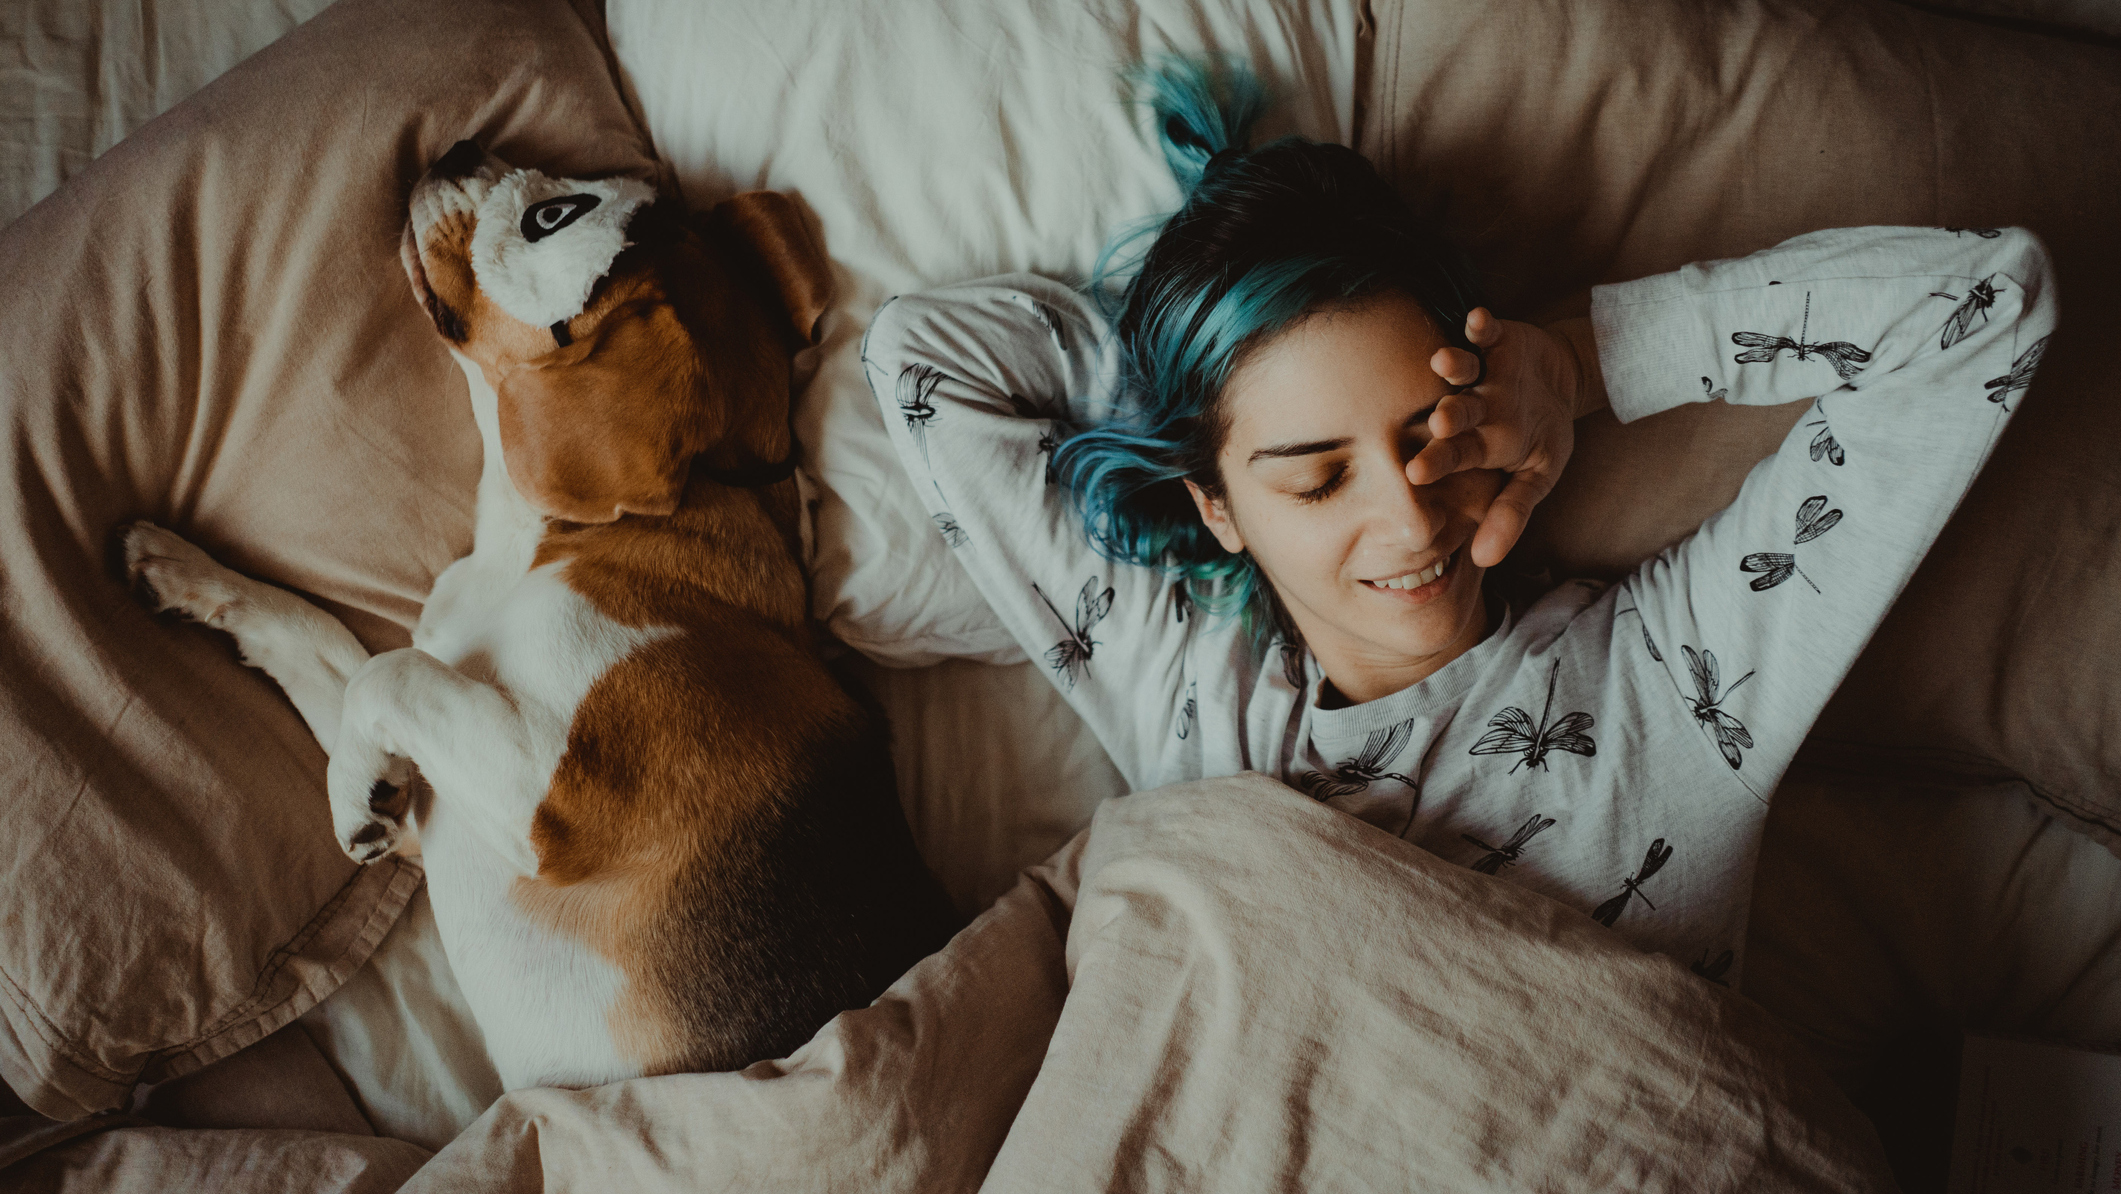 A woman lies in bed next to her dog that's wearing a patterned eye mask